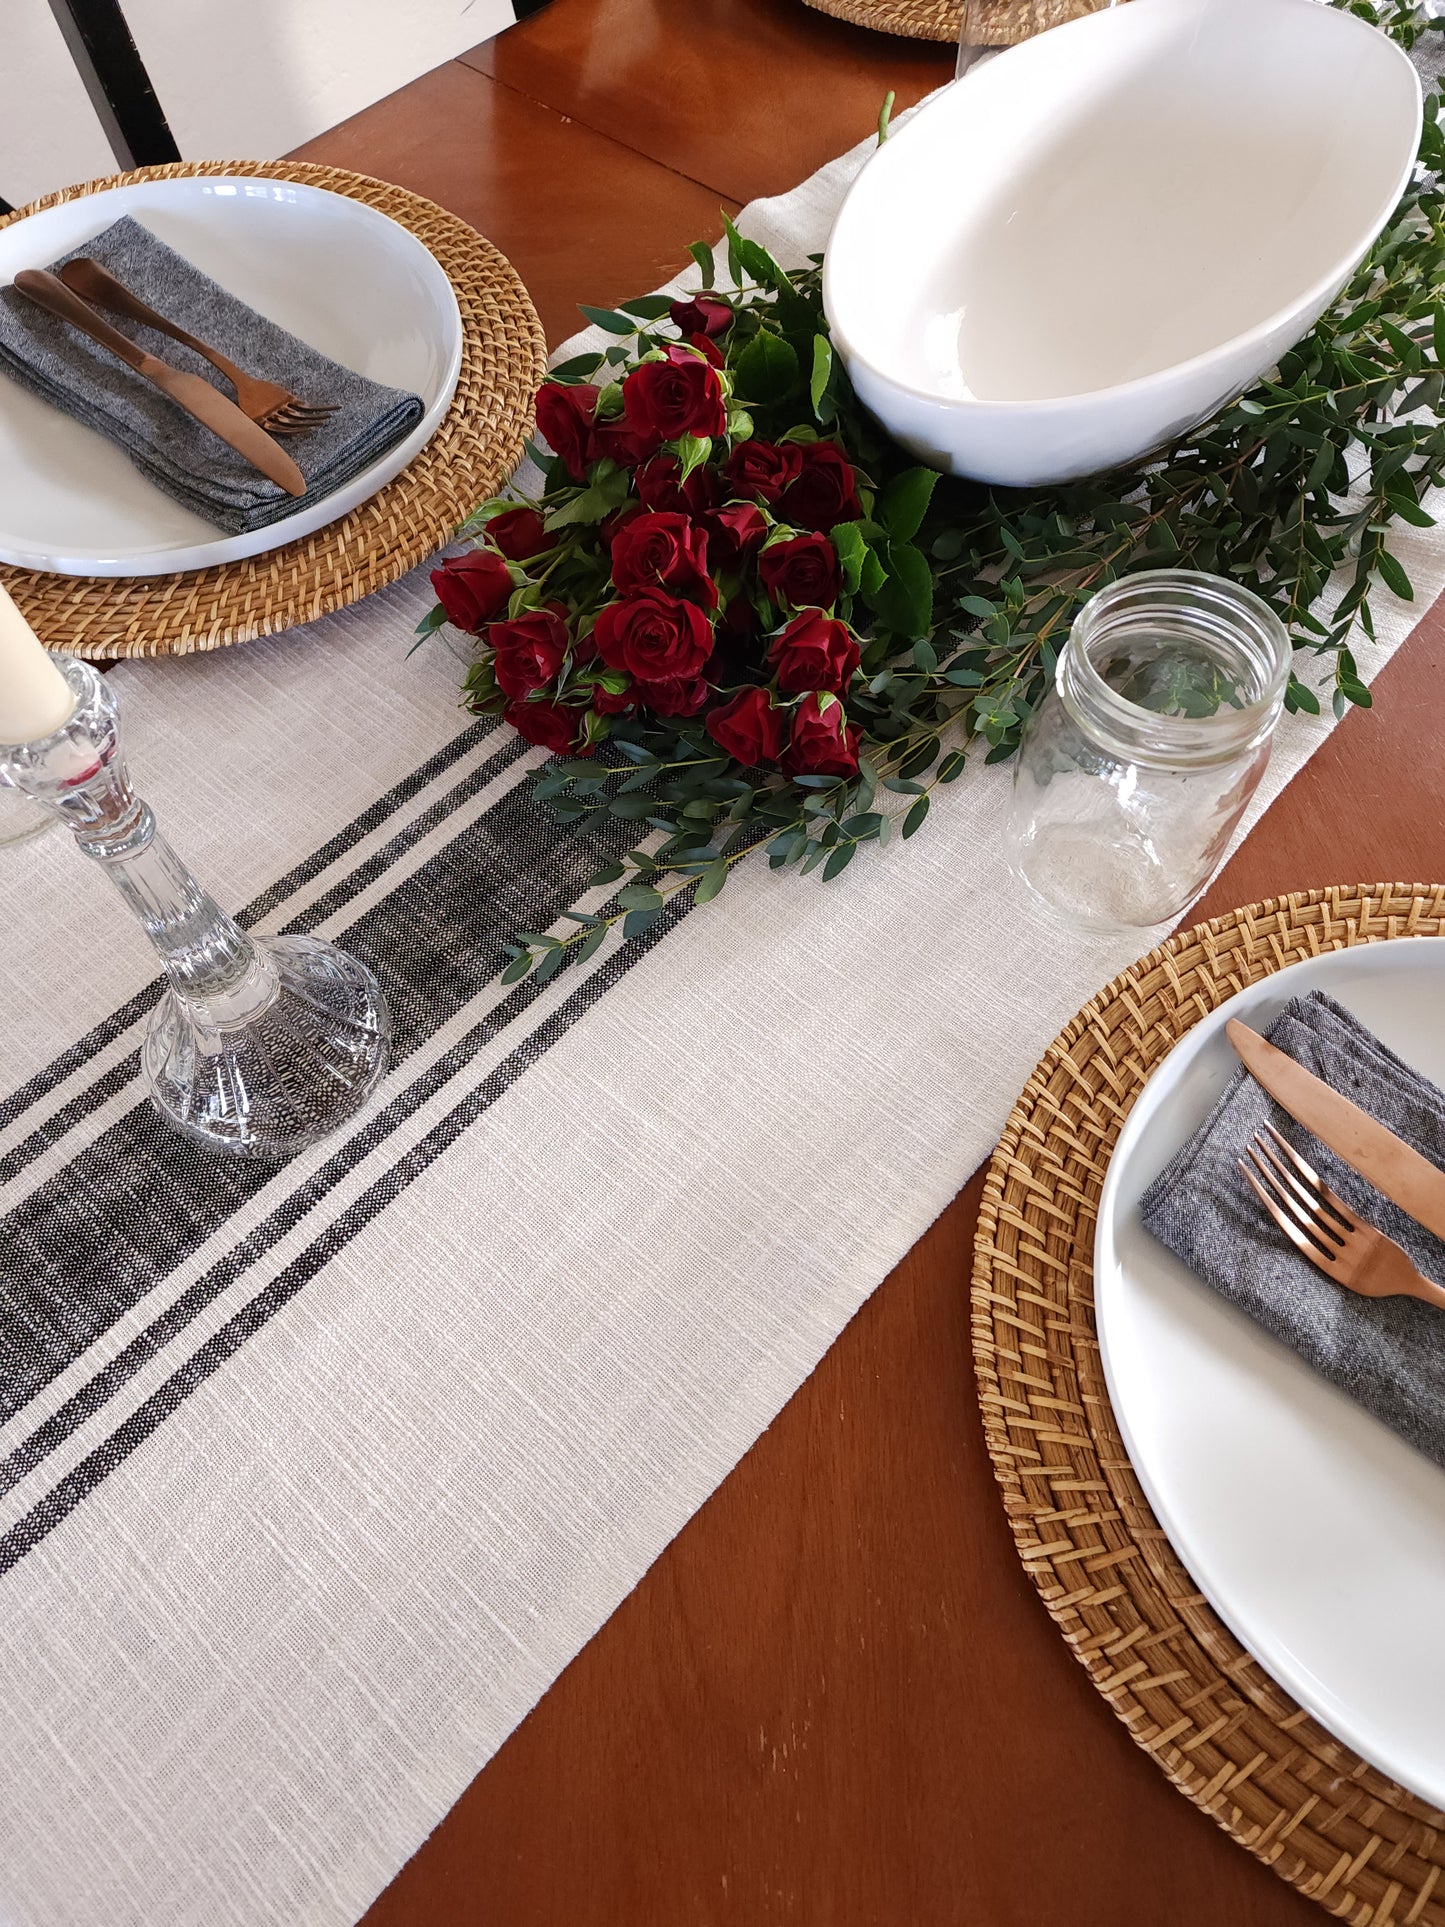 Ivory and Black Striped Rustic Table Runner